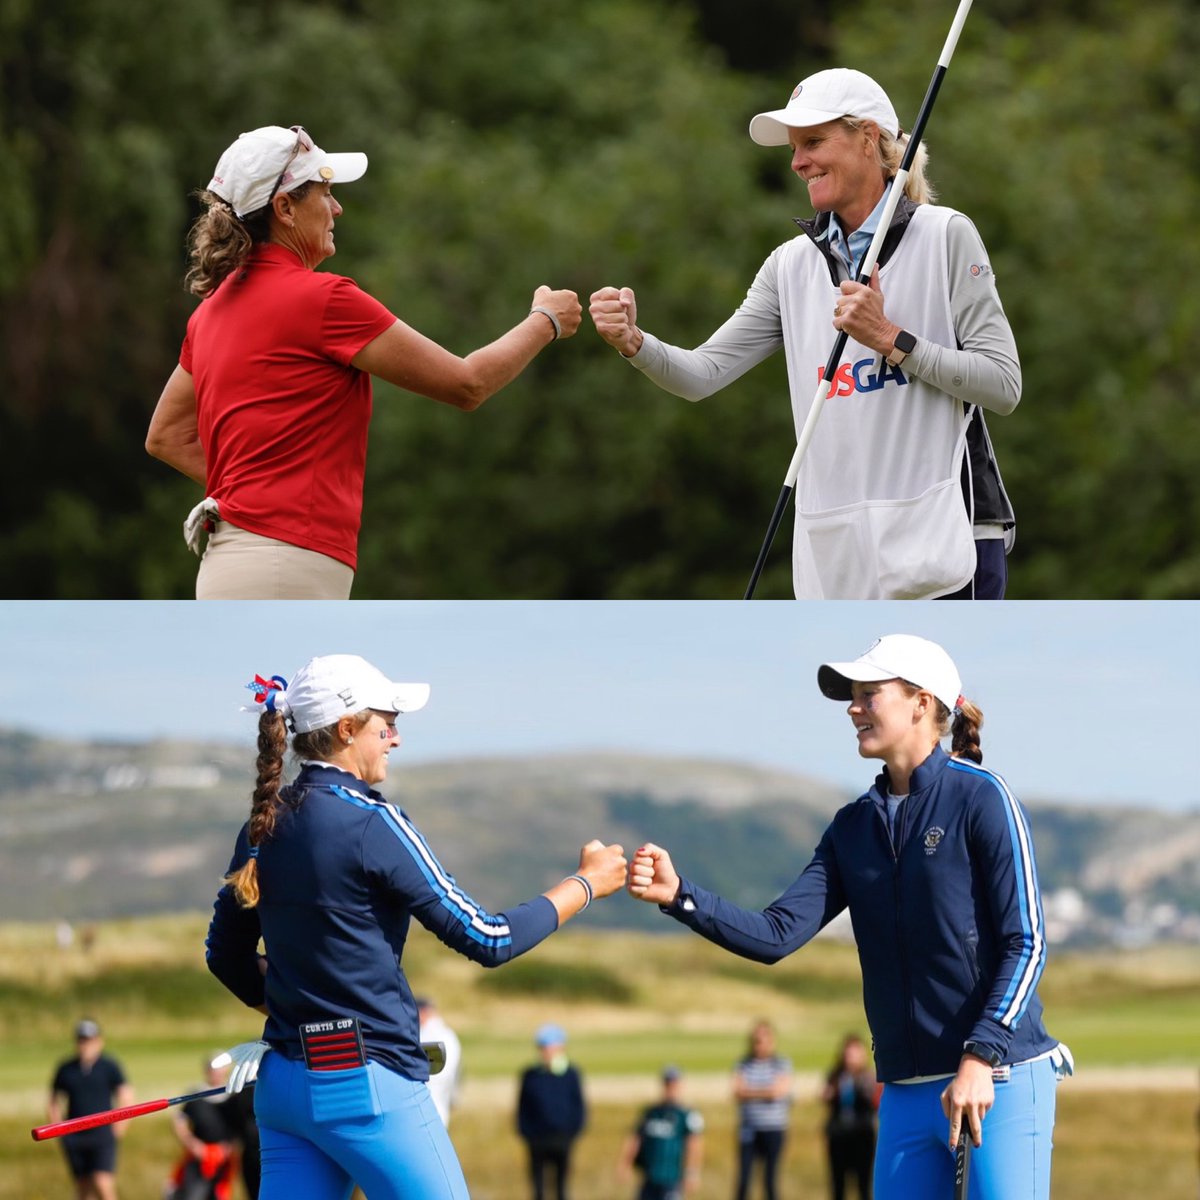 Like mother, like daughter. #USSeniorWomensAm | #CurtisCup